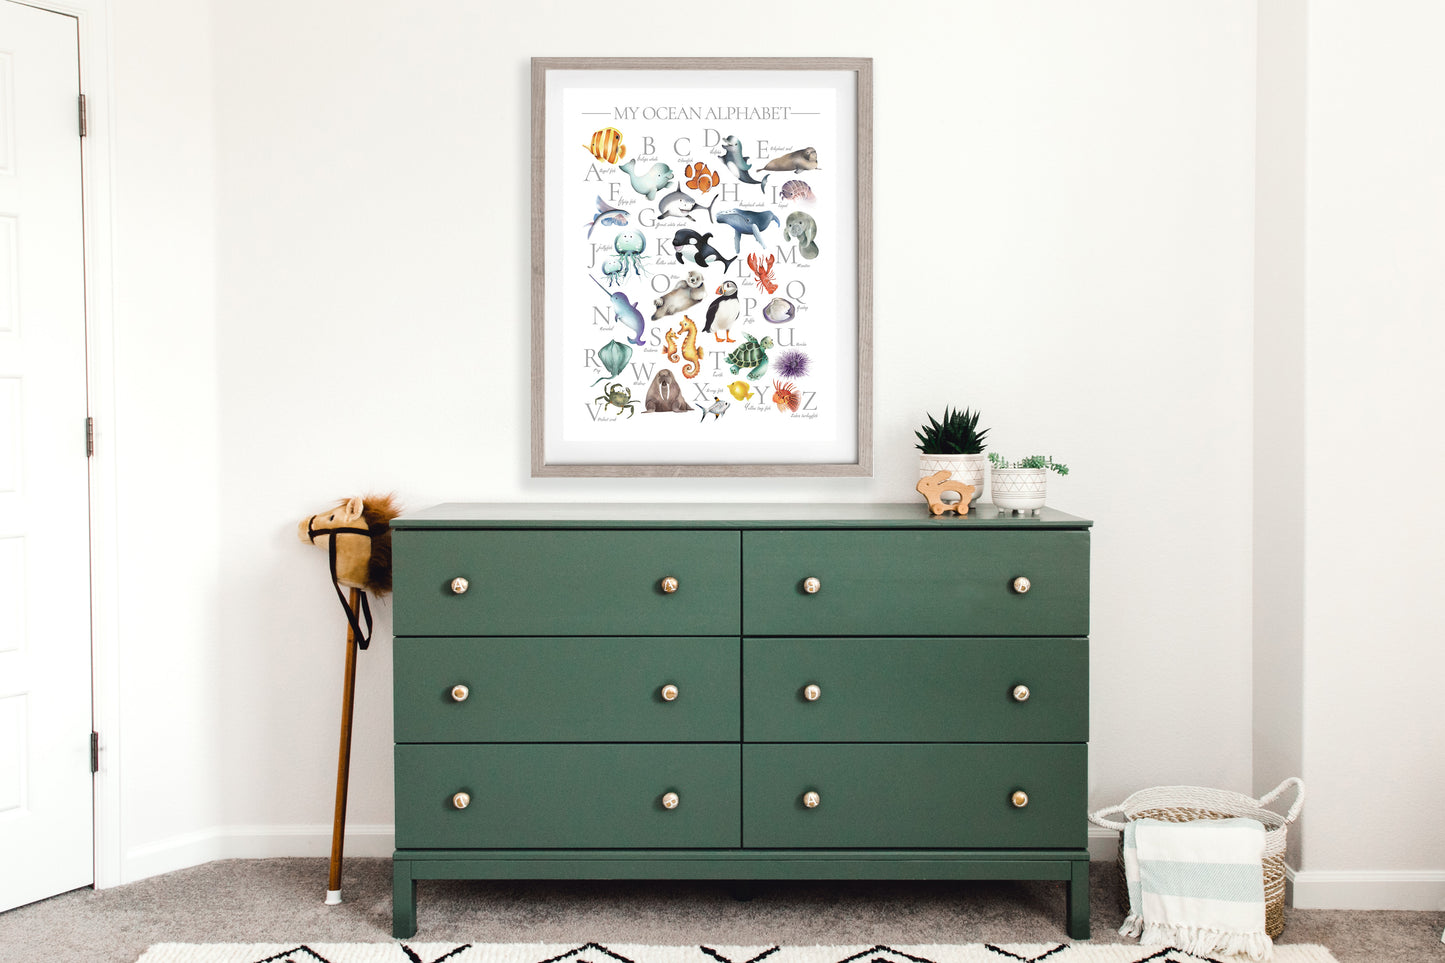 Colorful ocean animal alphabet print for kids with underwater animals from A thru Z framed in a light wood frame hanging on a wall above a green dresser in a kids bedroom- Studio Q - Art by Nicky Quartermaine Scott